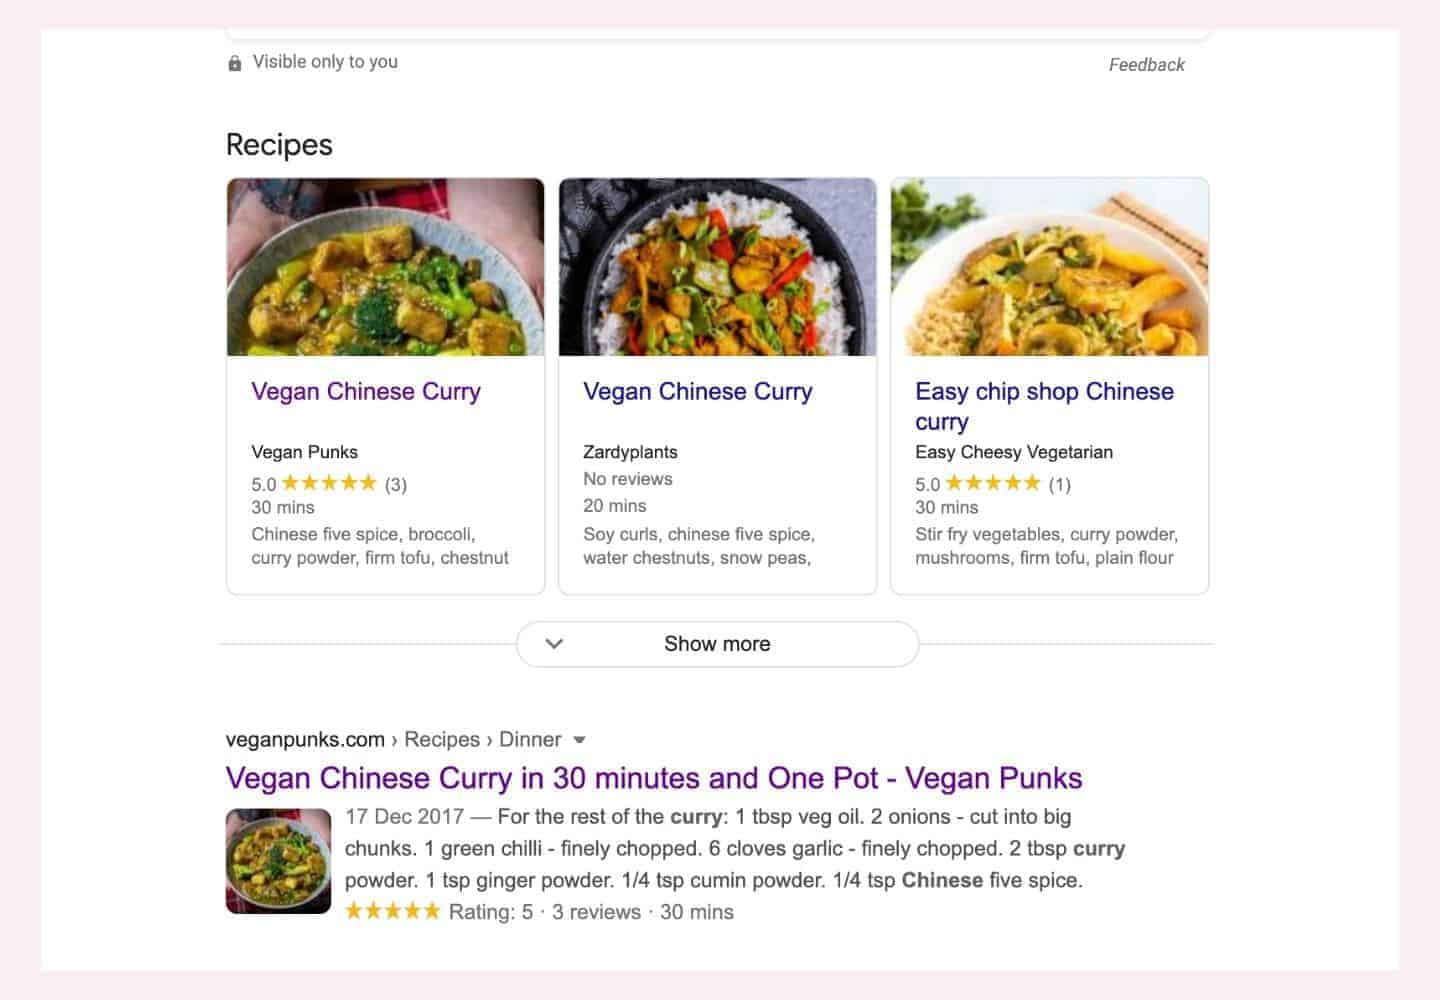 Screen shot of google search results showing our recipe with a rich snippet